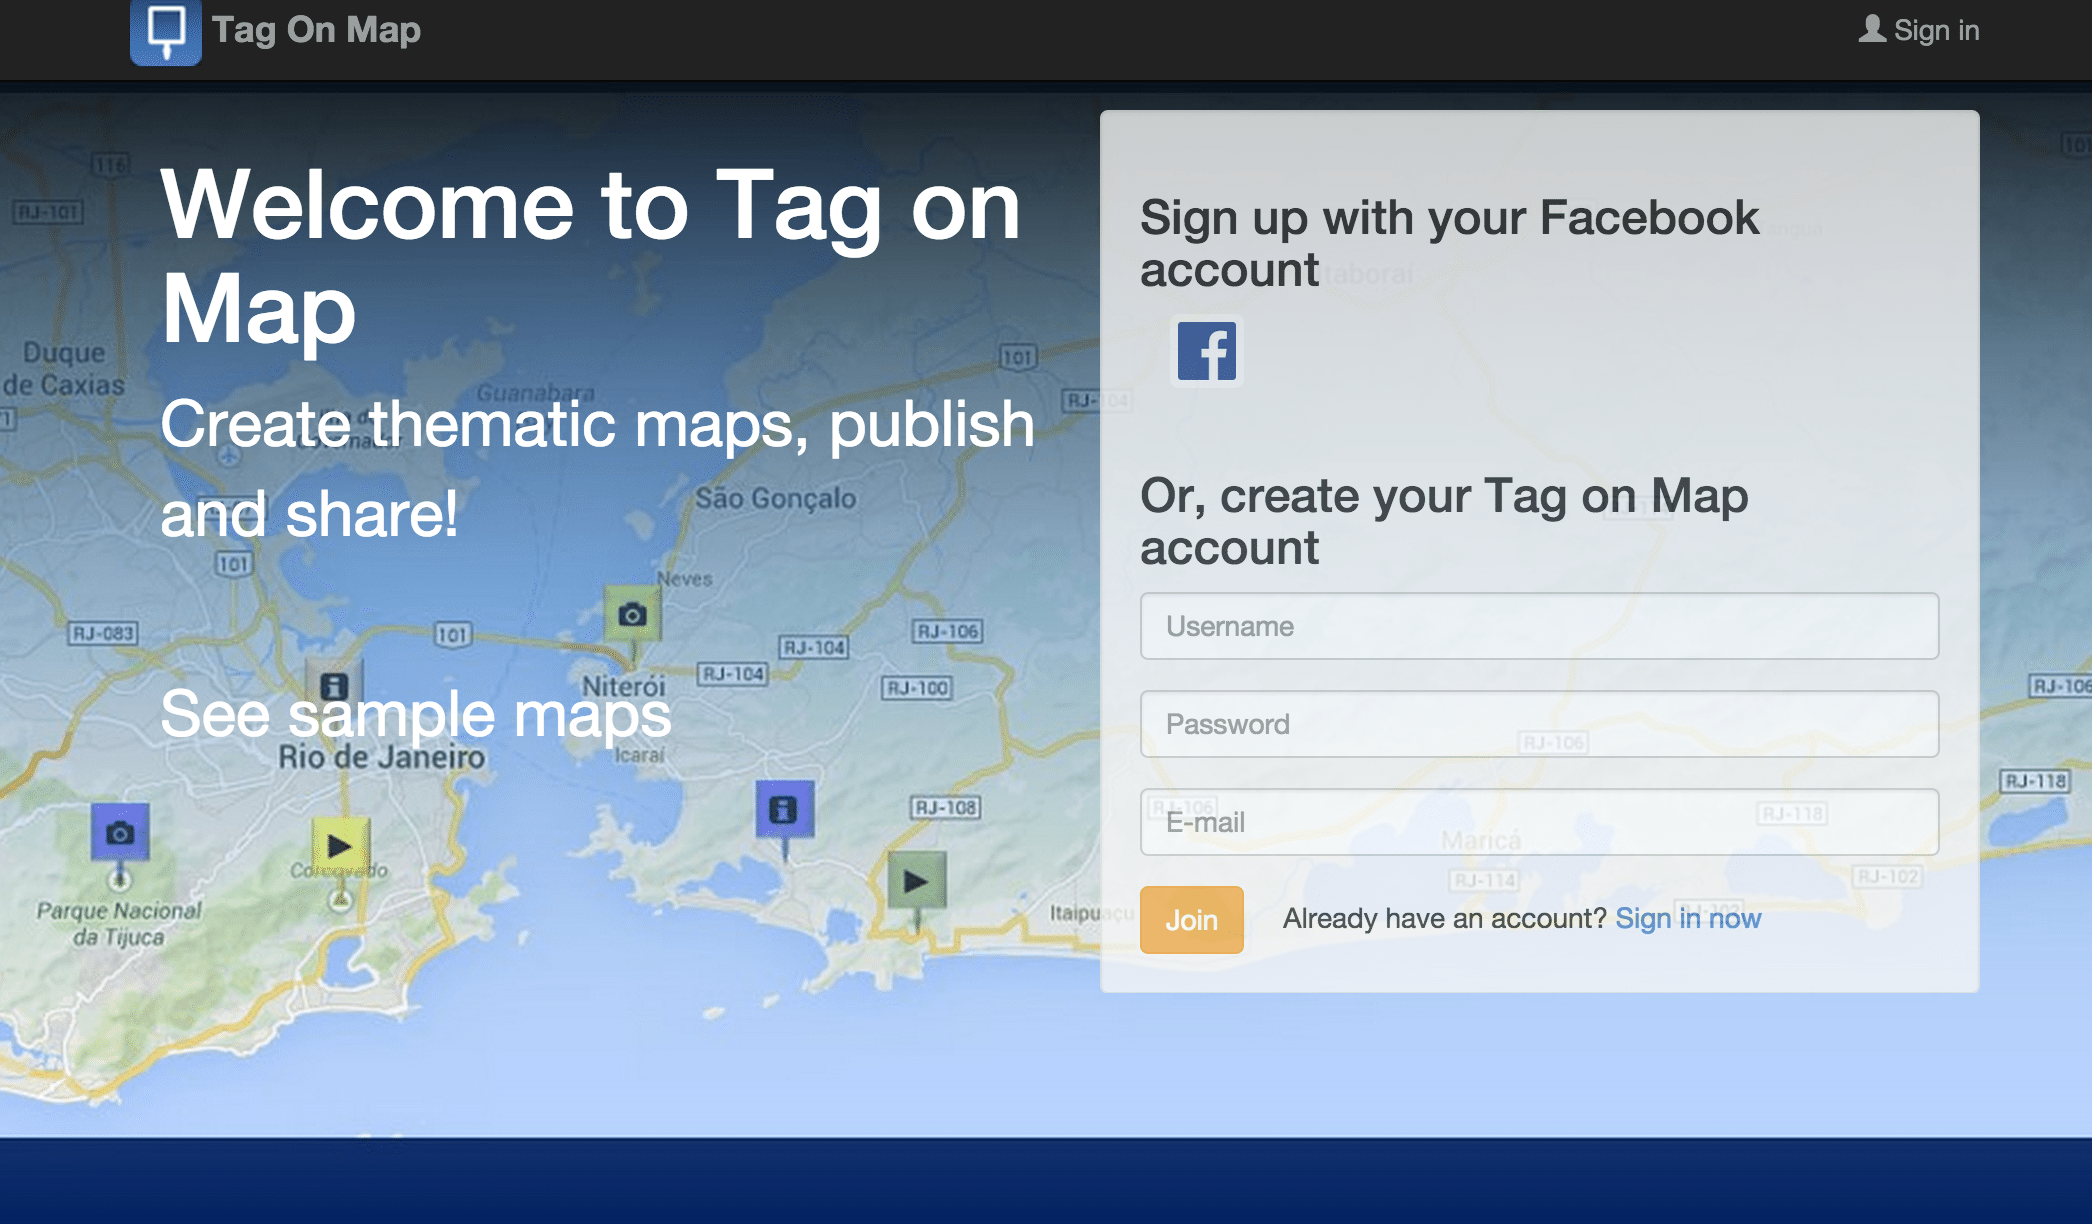 Tagonmap.com is a map-based social media platform. Users can tag the exact location of their videos, photos, texts and links on the dynamic map (Google Maps) by means of special map markers.